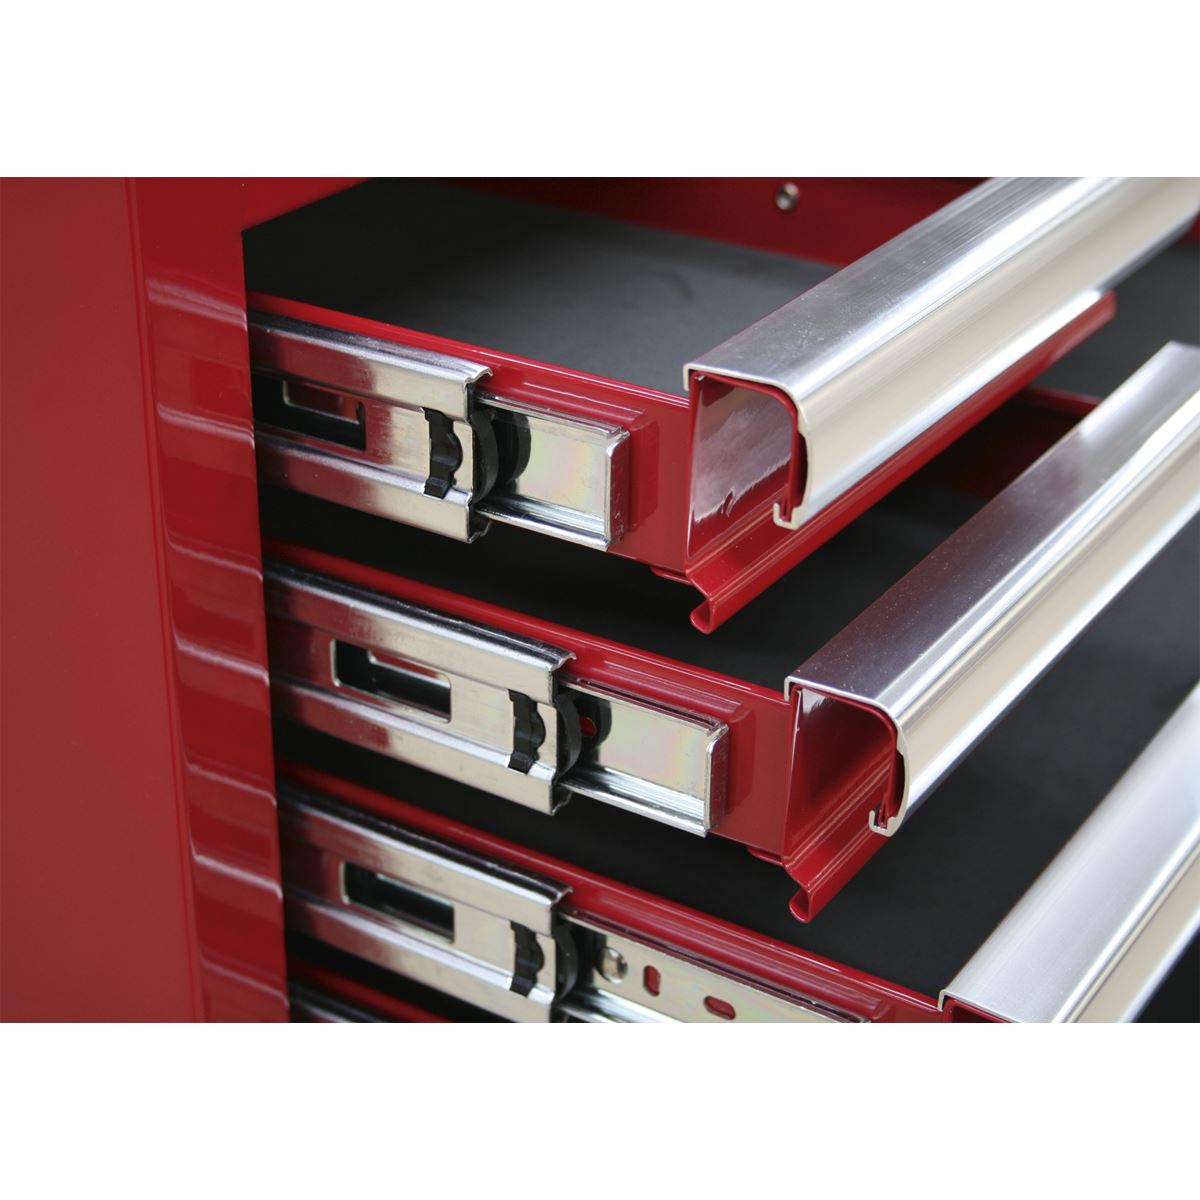 Sealey Superline Pro Topchest 14 Drawer with Ball-Bearing Slides Heavy-Duty - Red